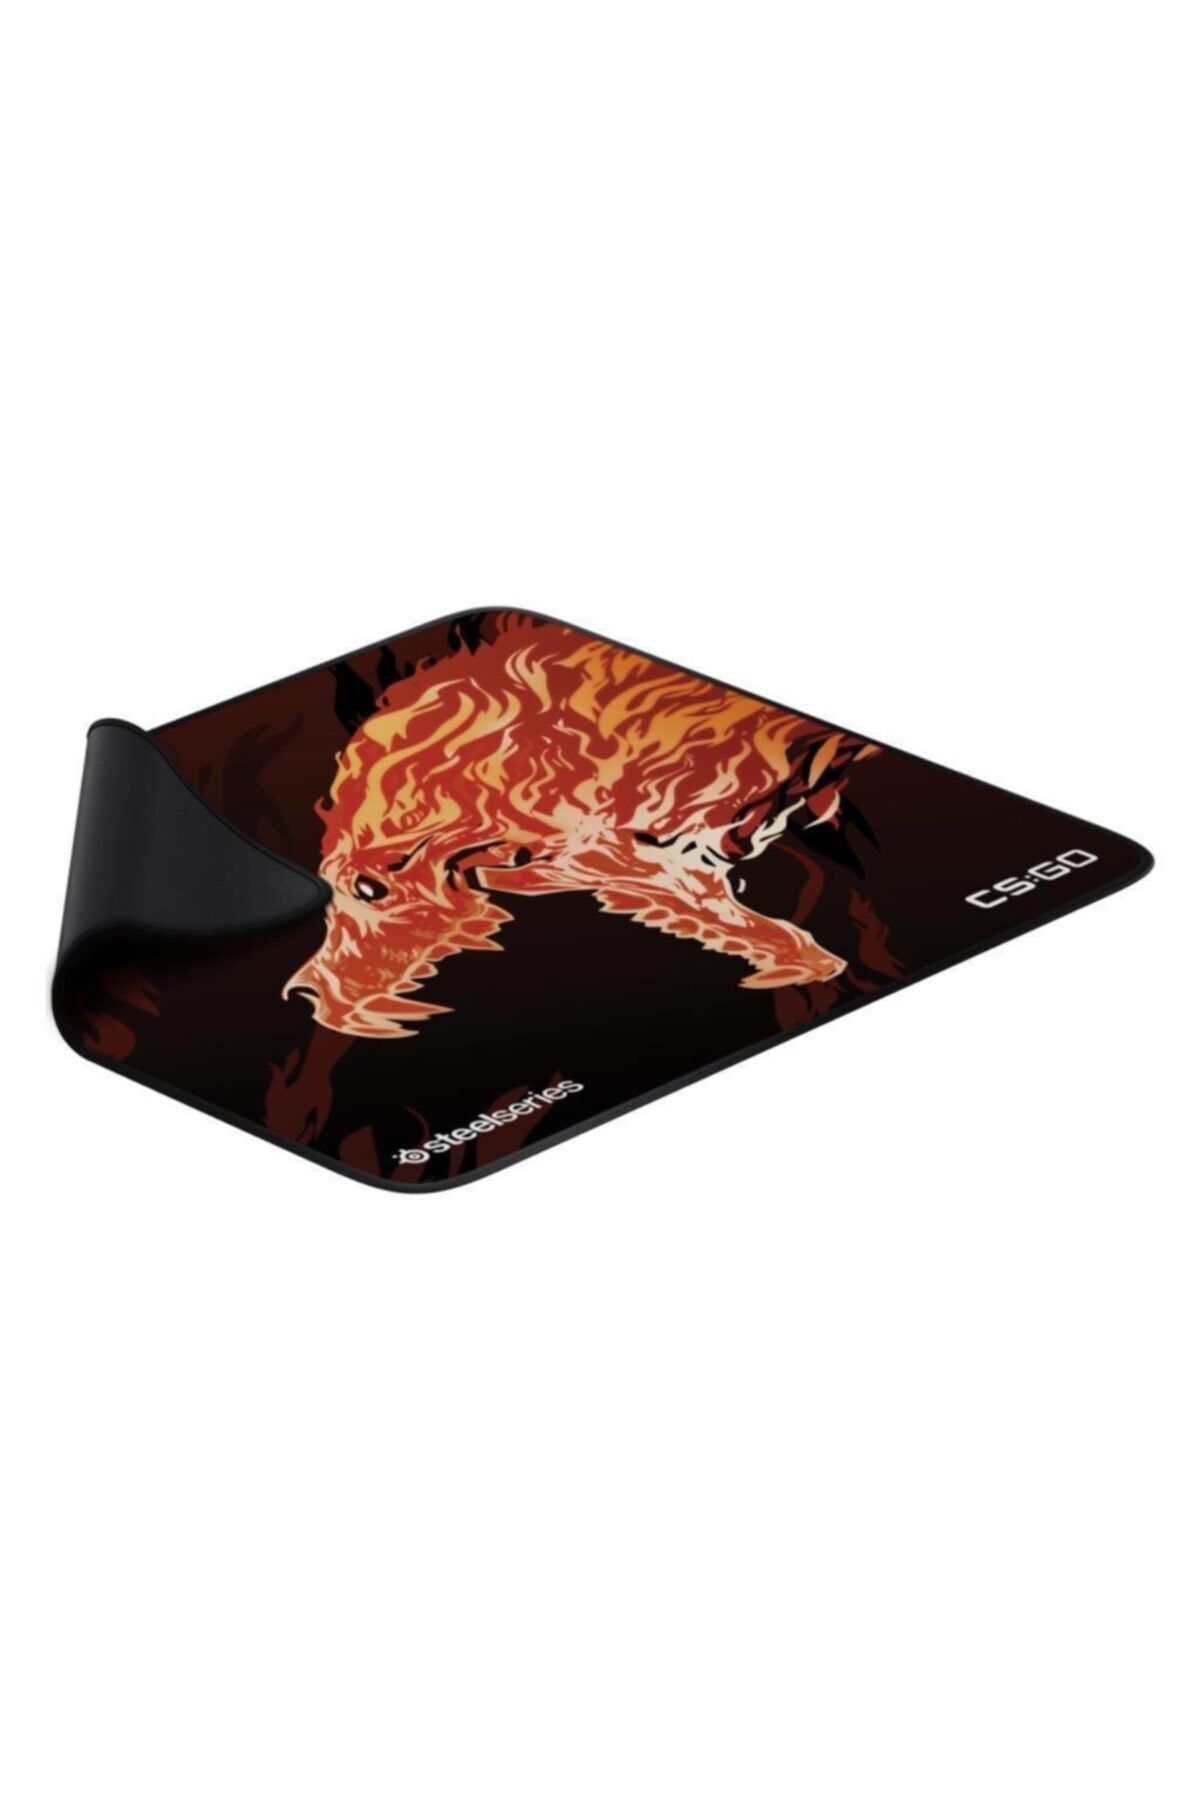 SteelSeries Qck+ Limited Cs:go Howl Edition Mousepad